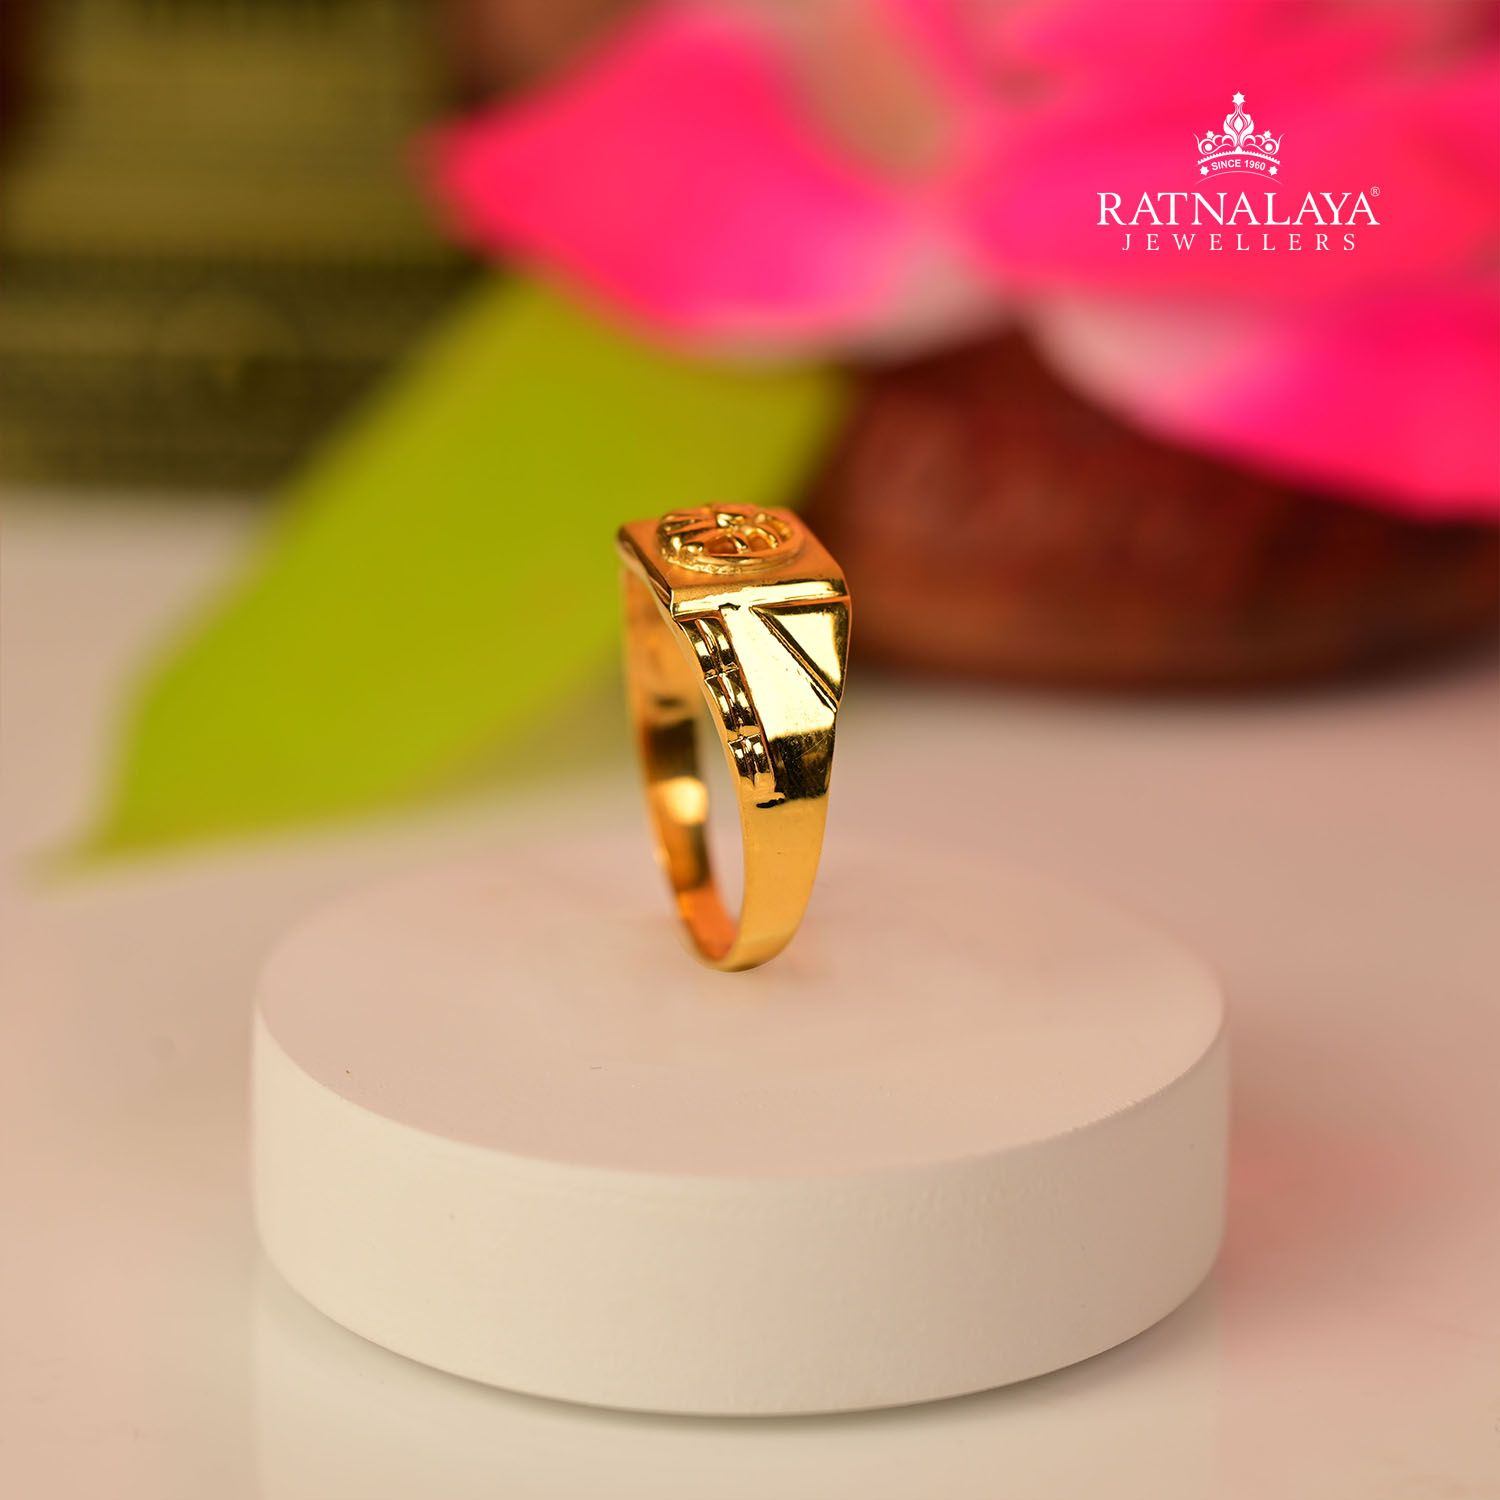 Buy quality Precious Designer Fancy Plain Gold Gents Ring in Ahmedabad